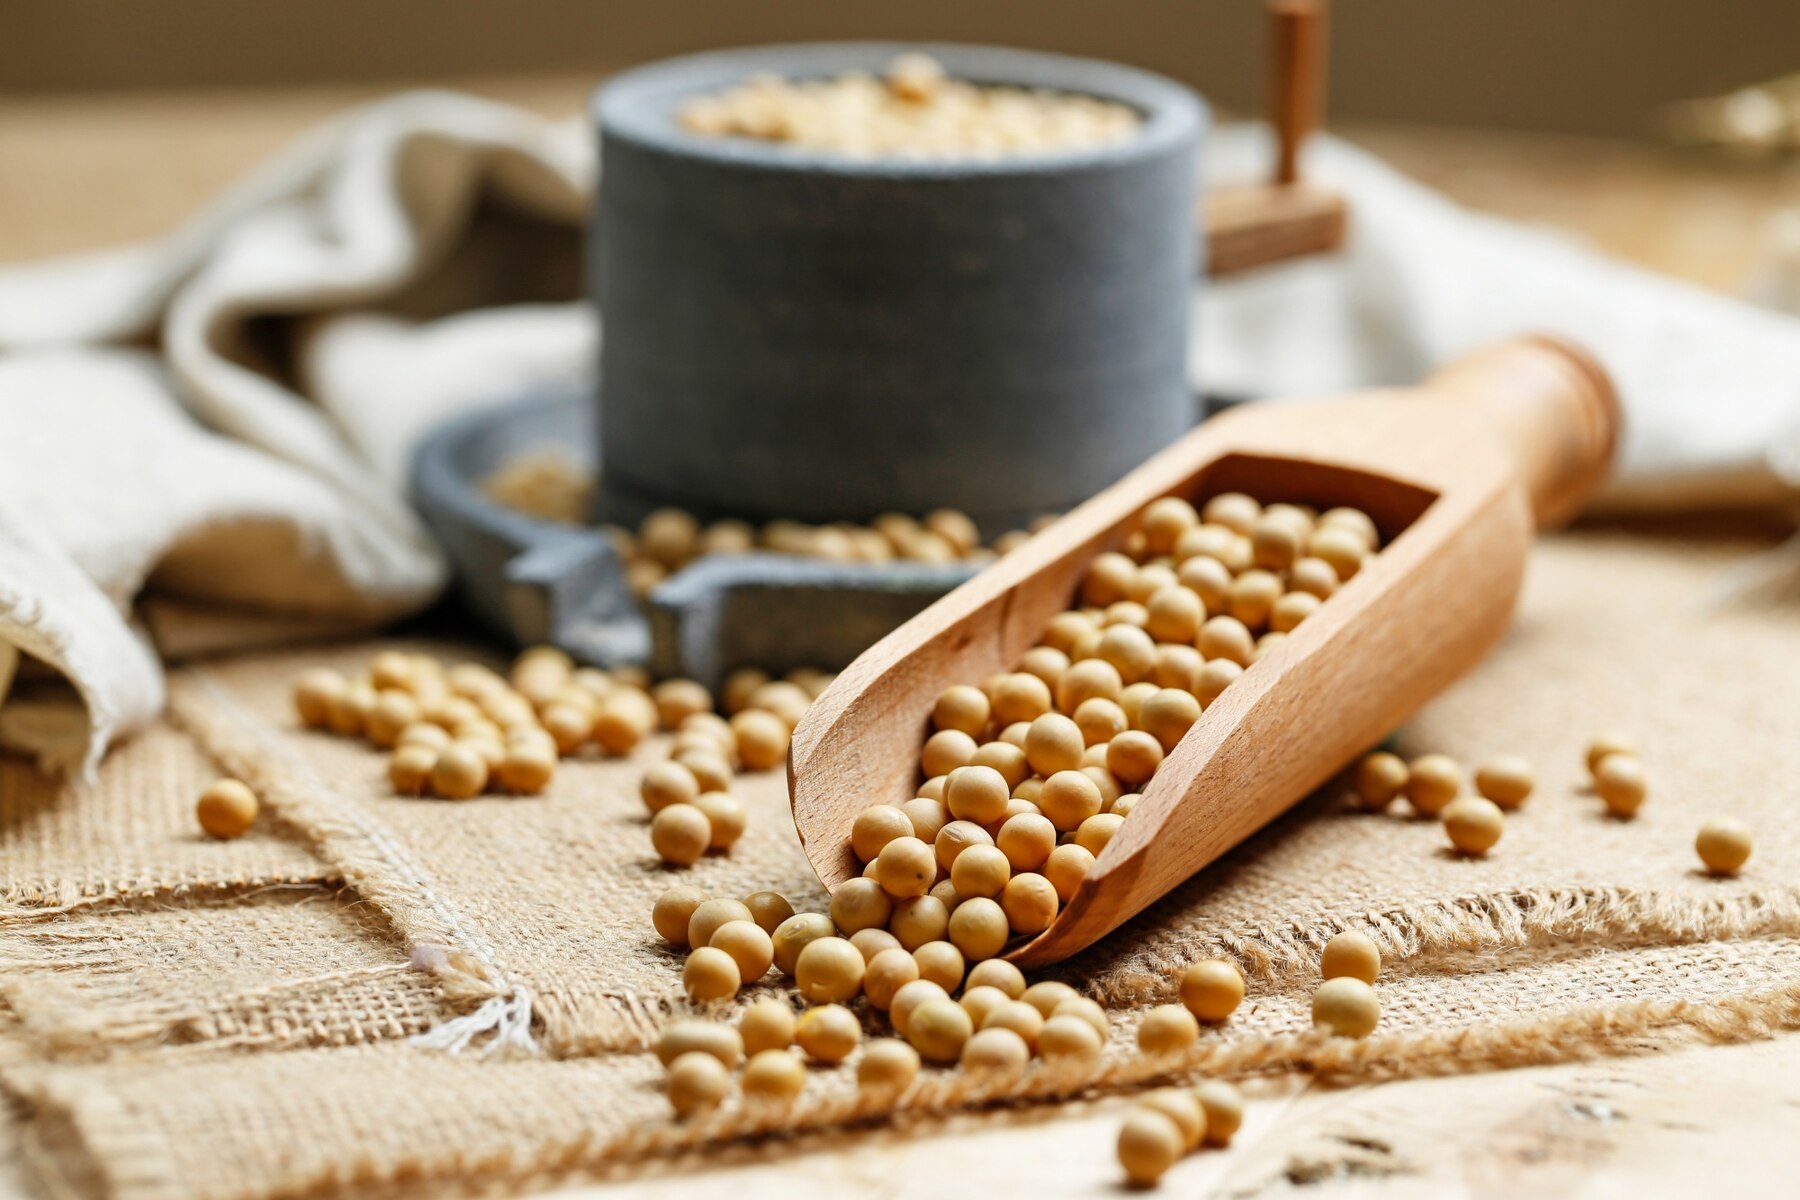 soybeans-in-wooden-scoop-and-a-little-stone-mill_1387-306.jpg